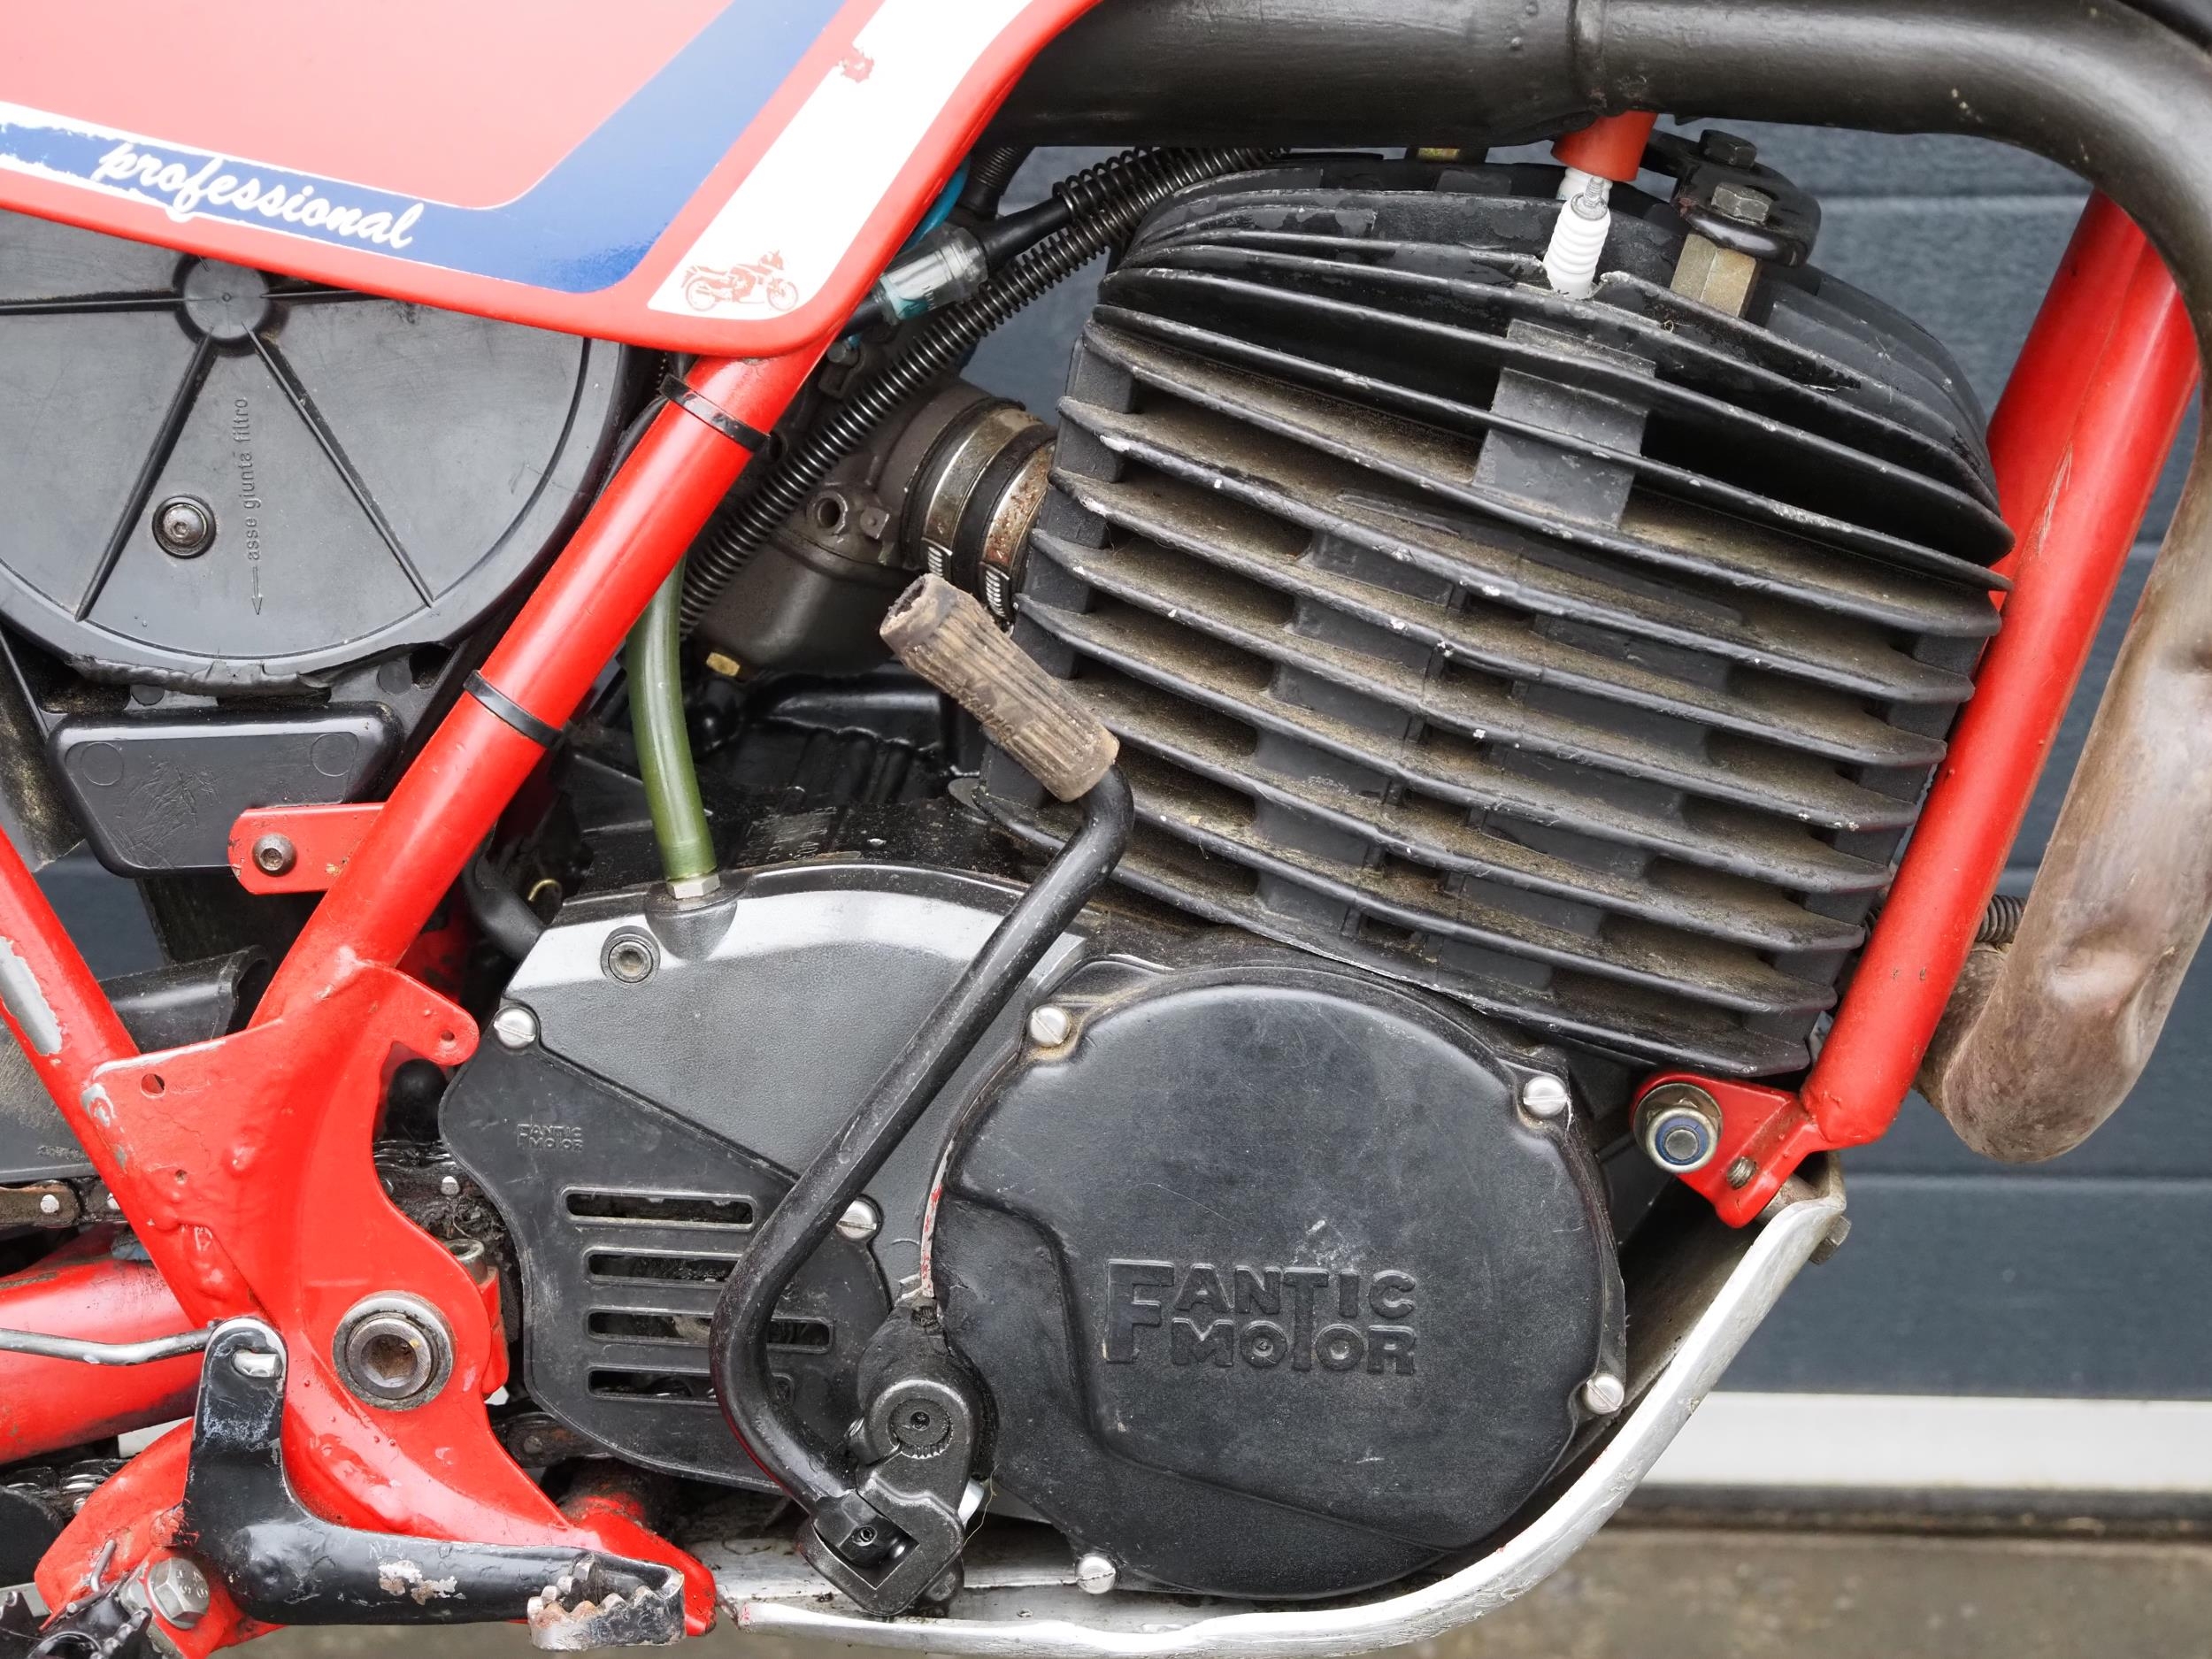 Fantic Trials 300 professional bike. 249 cc Frame No. 34001839 Engine No. 001842 Fitted with - Image 4 of 5